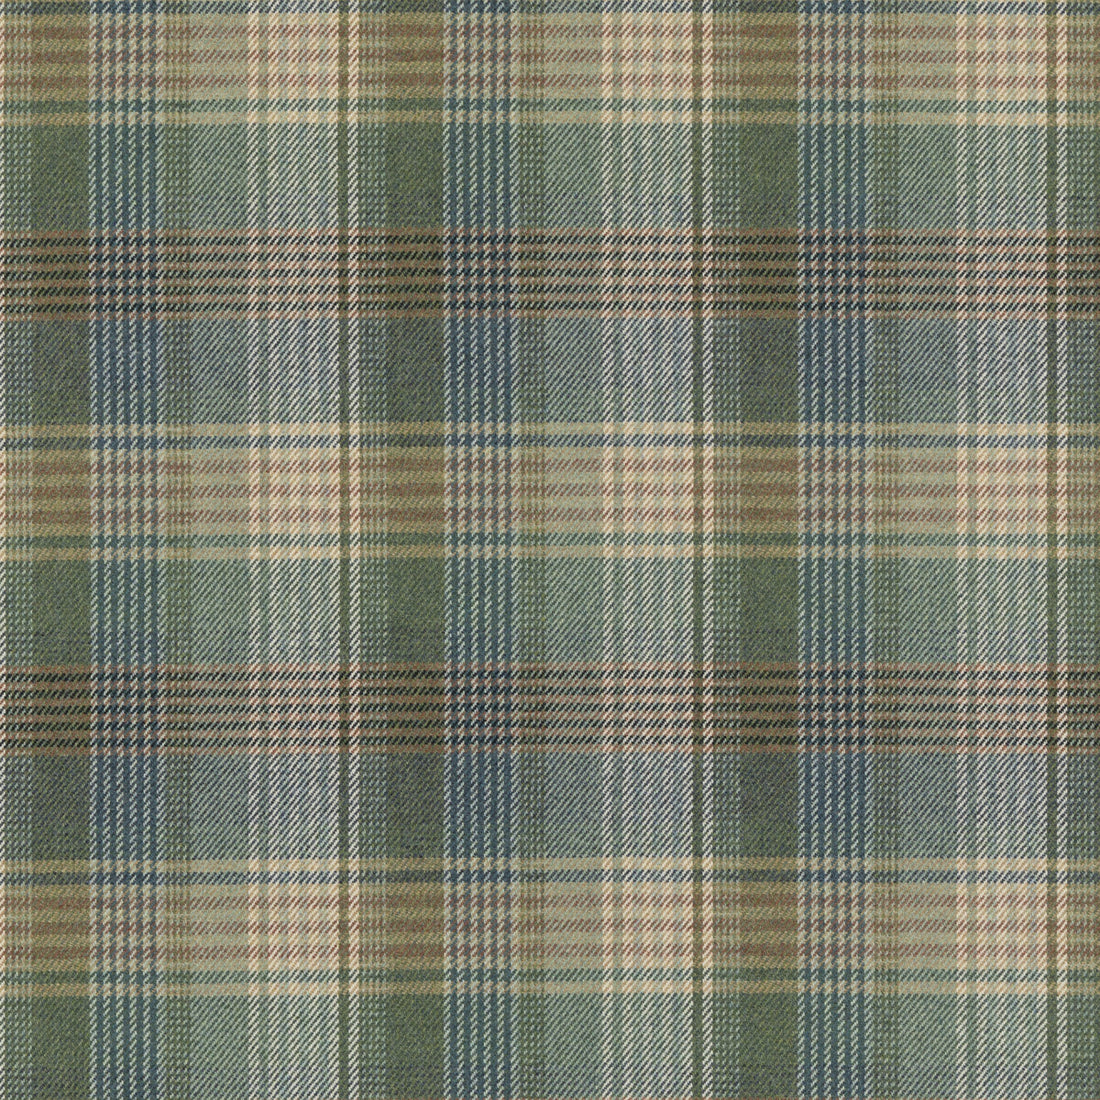 Braemar fabric in teal color - pattern FD803.R11.0 - by Mulberry in the Mulberry Wools IV collection